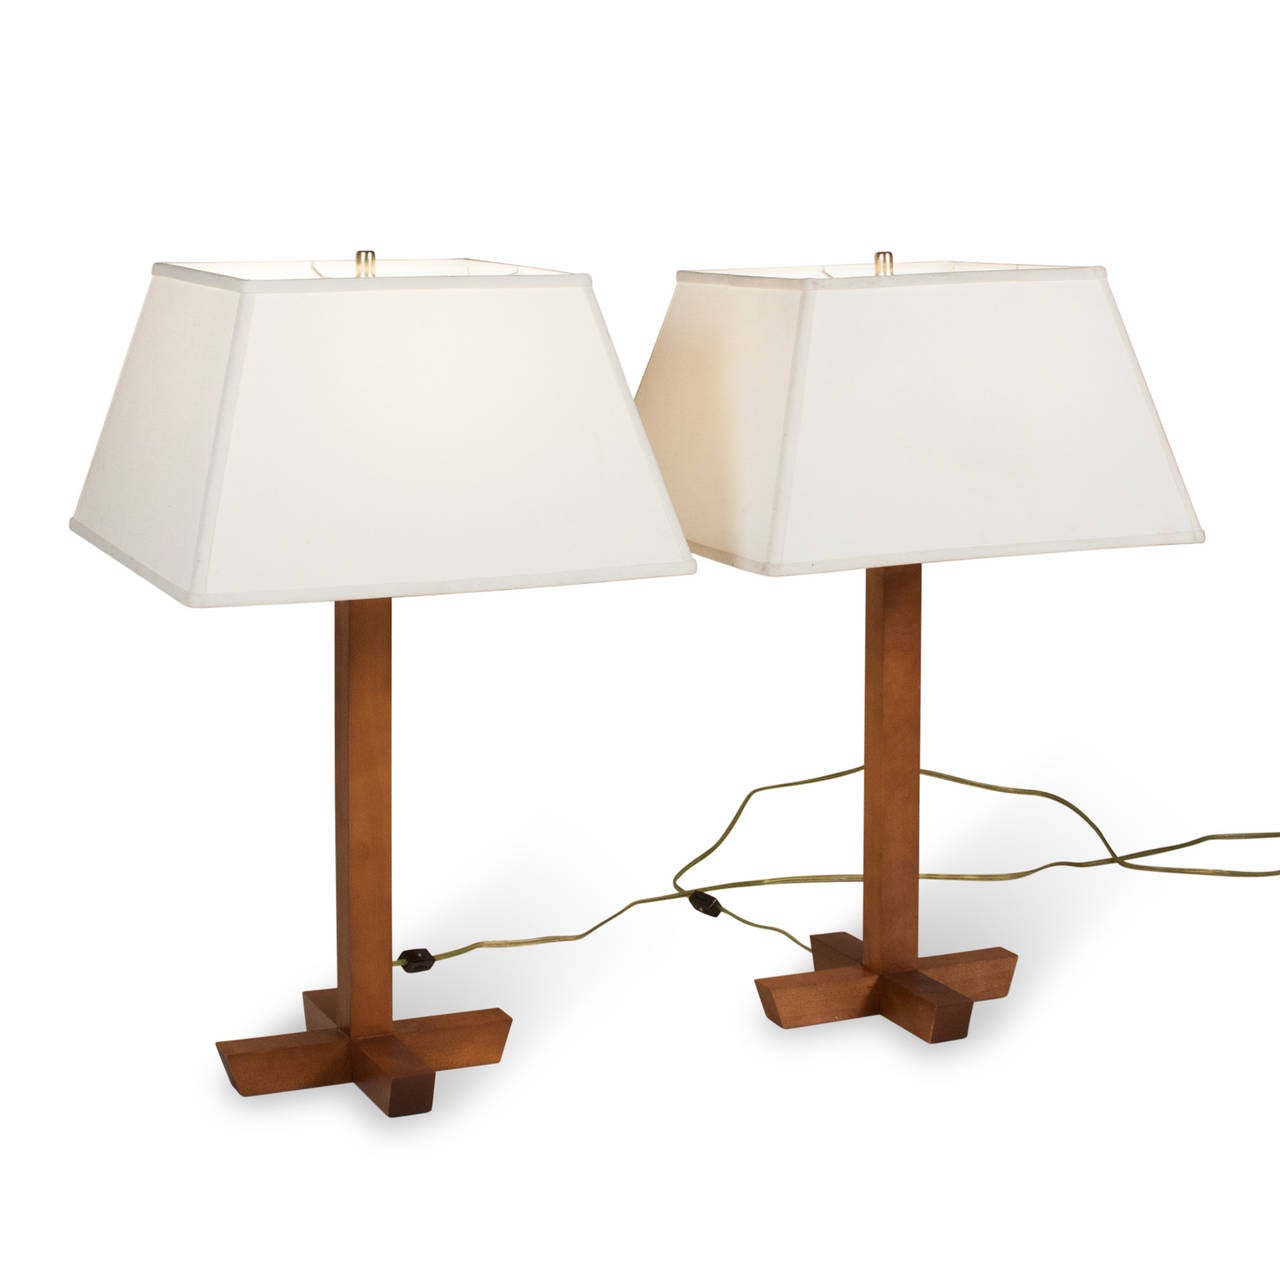 Pair of walnut table lamps, a single square column mounted on an X-base of walnut, American, 1970s. Overall height 27 in, base measures 10 in square. Height to top of socket 19 1/2 in. Wood is 1 1/2 in square. Linen shade measures top 11 1/2 in